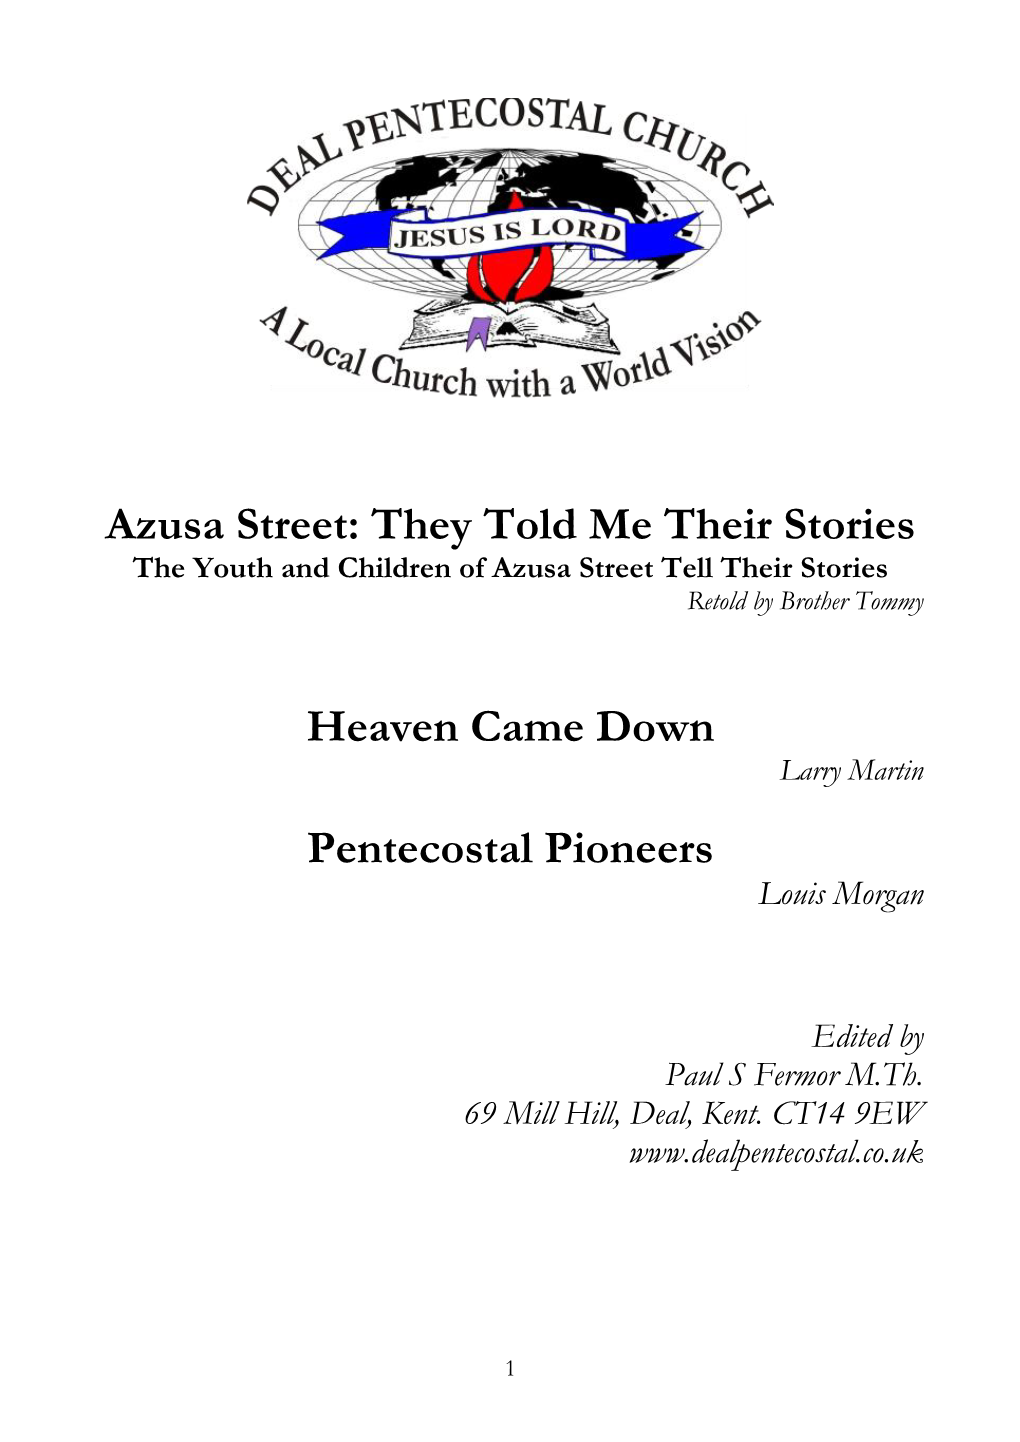 Azusa Street: They Told Me Their Stories the Youth and Children of Azusa Street Tell Their Stories Retold by Brother Tommy